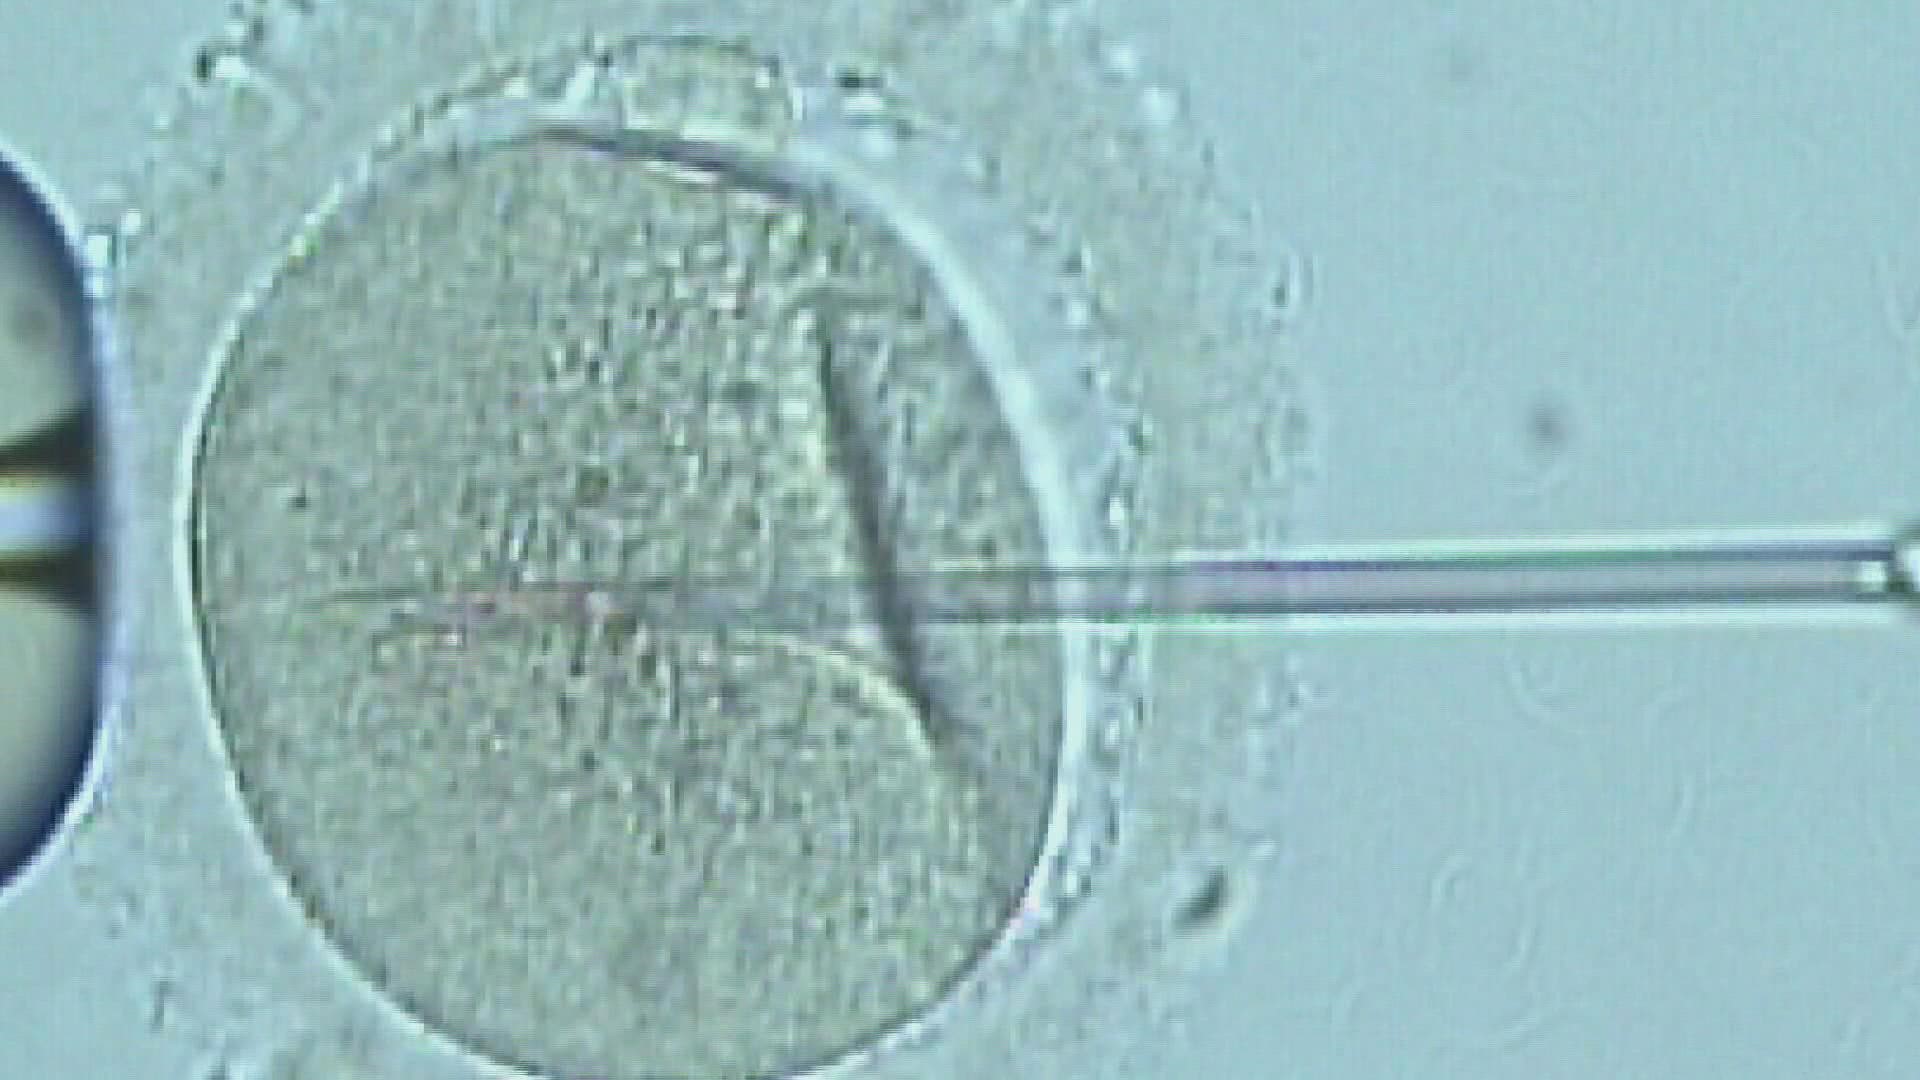 IVF is a procedure meant to help make a woman pregnant and could involve making several embryos. However, states can pass laws saying life begins at conception.